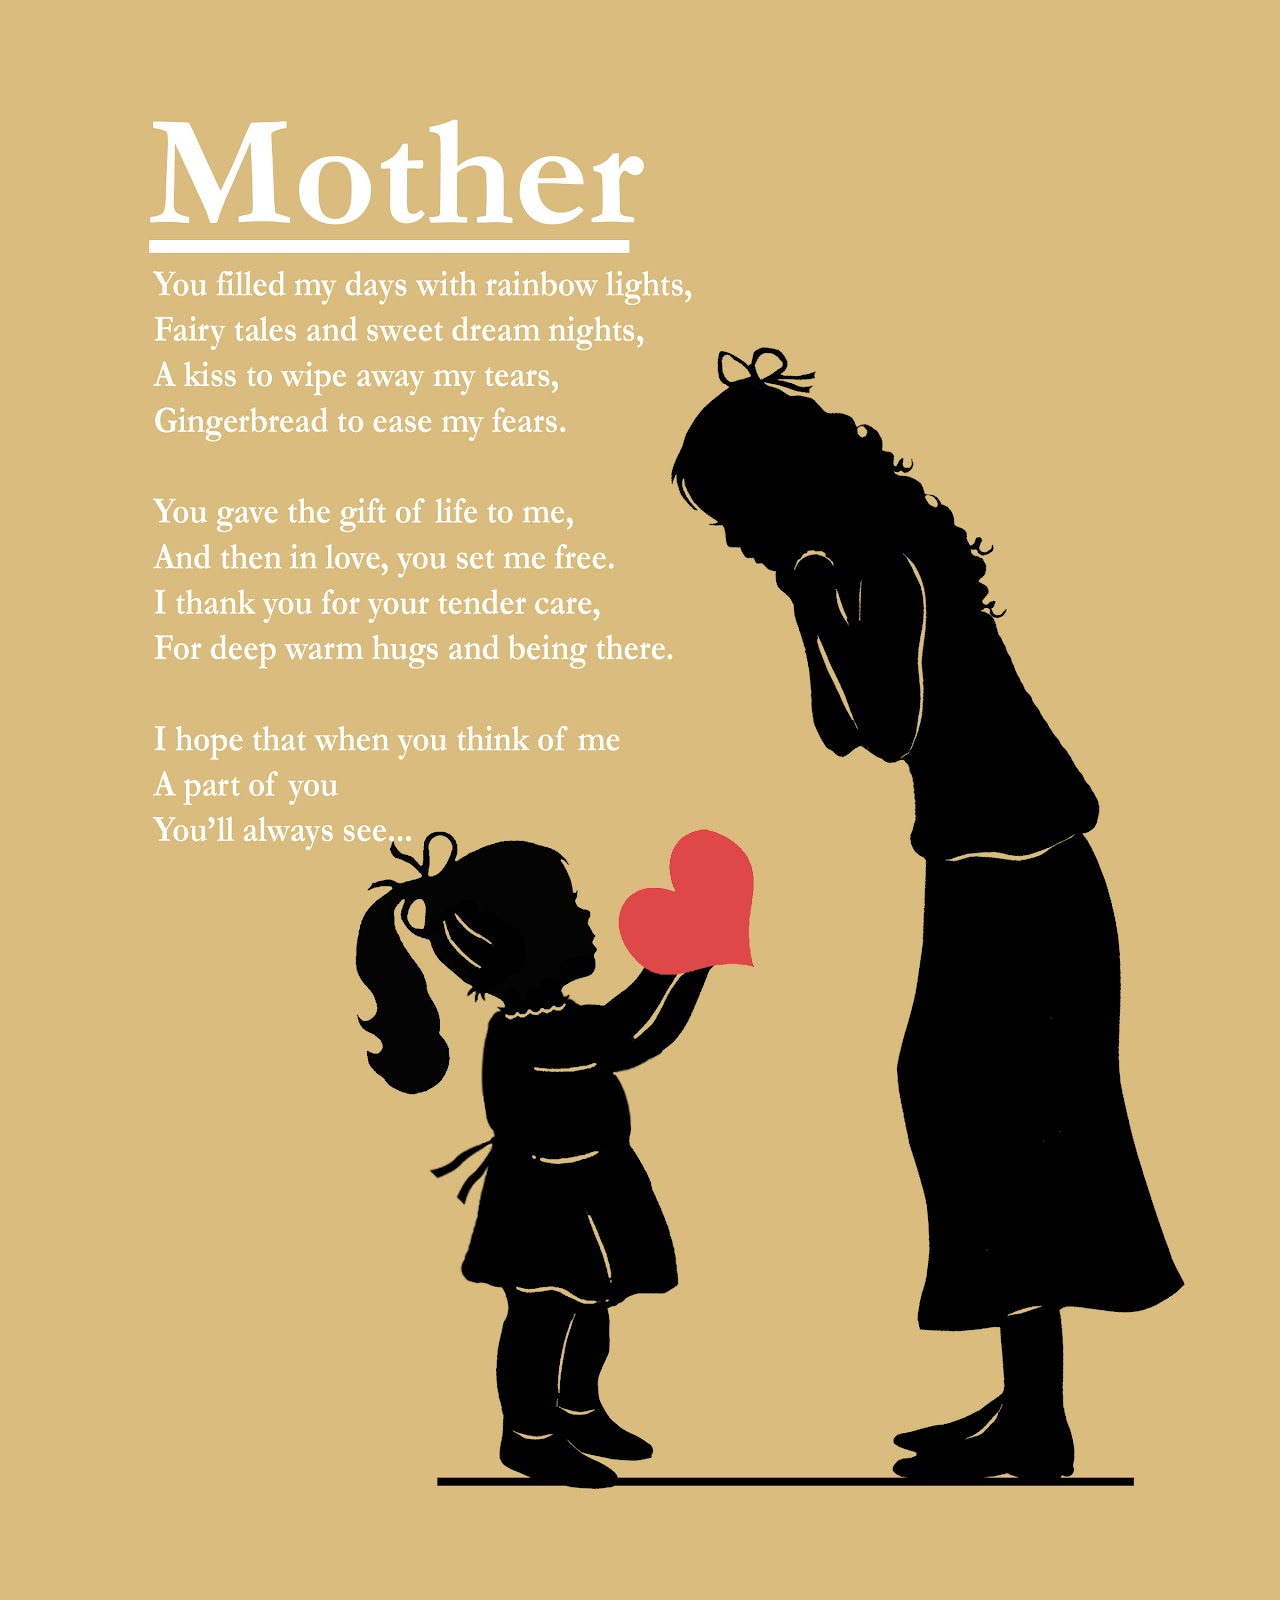 Daughter mothers перевод. The poem of the Birthday mother. Mothers Day poems for sons. Poem for Birthday mother. Мальчик Лев mother’s Day.